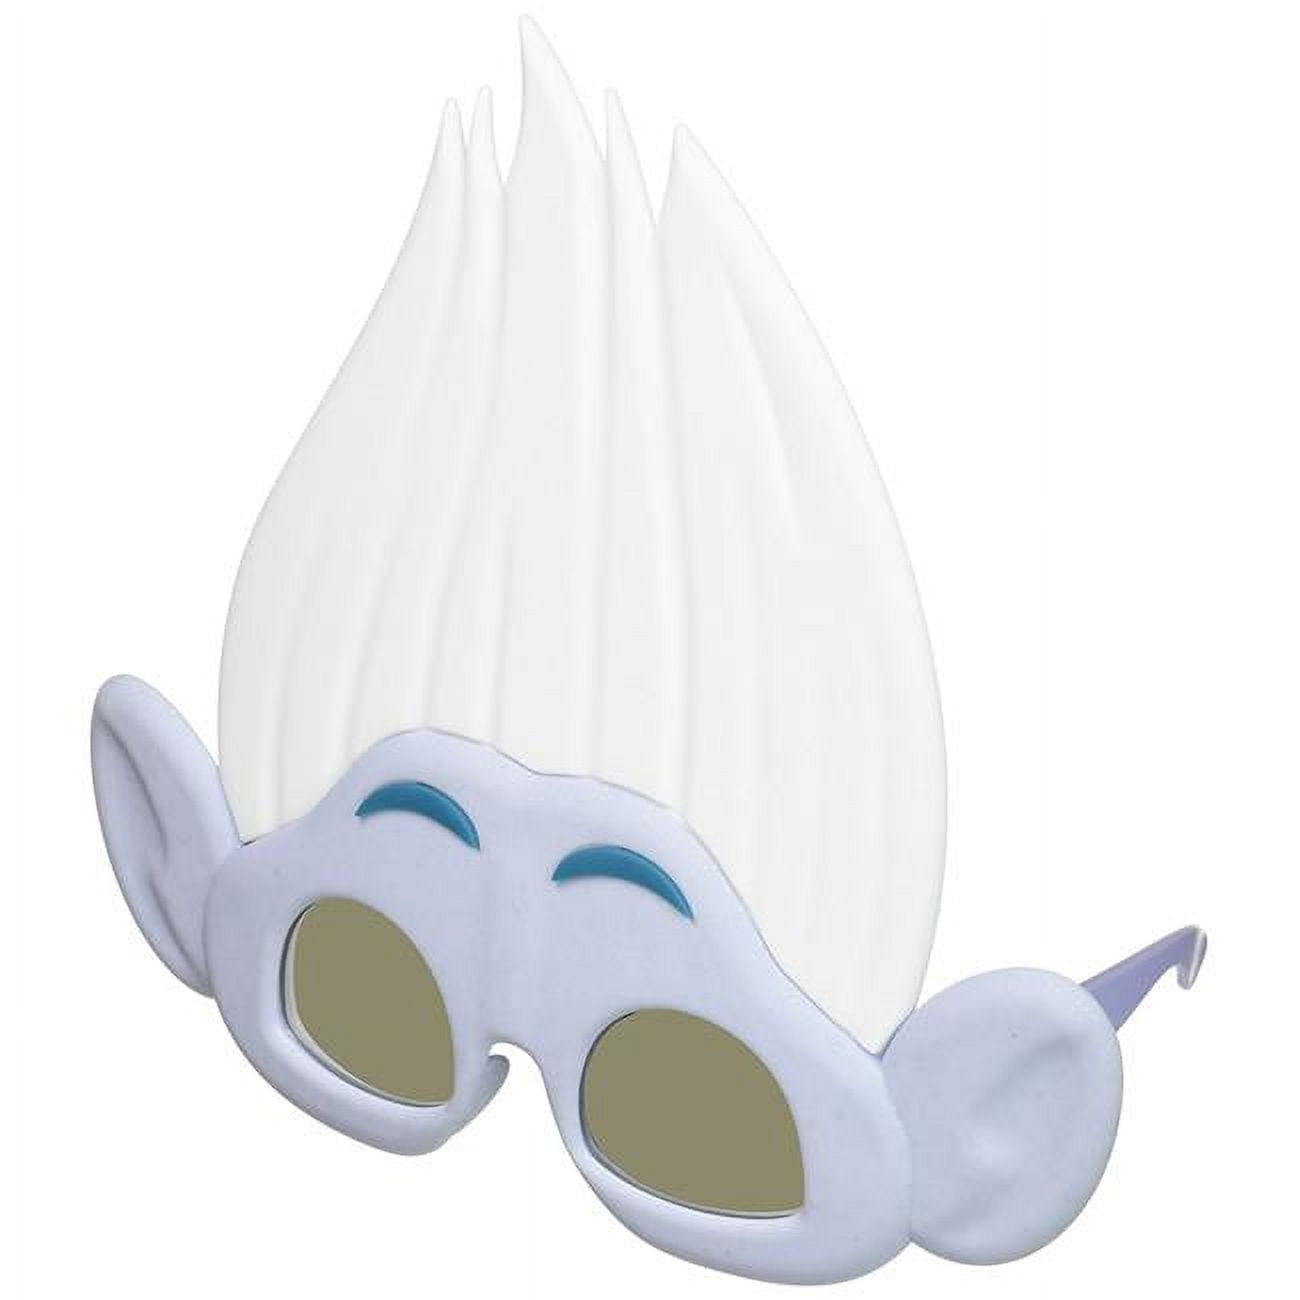 Picture of Sunstaches SG2645 Sunglasses Trolls Guy